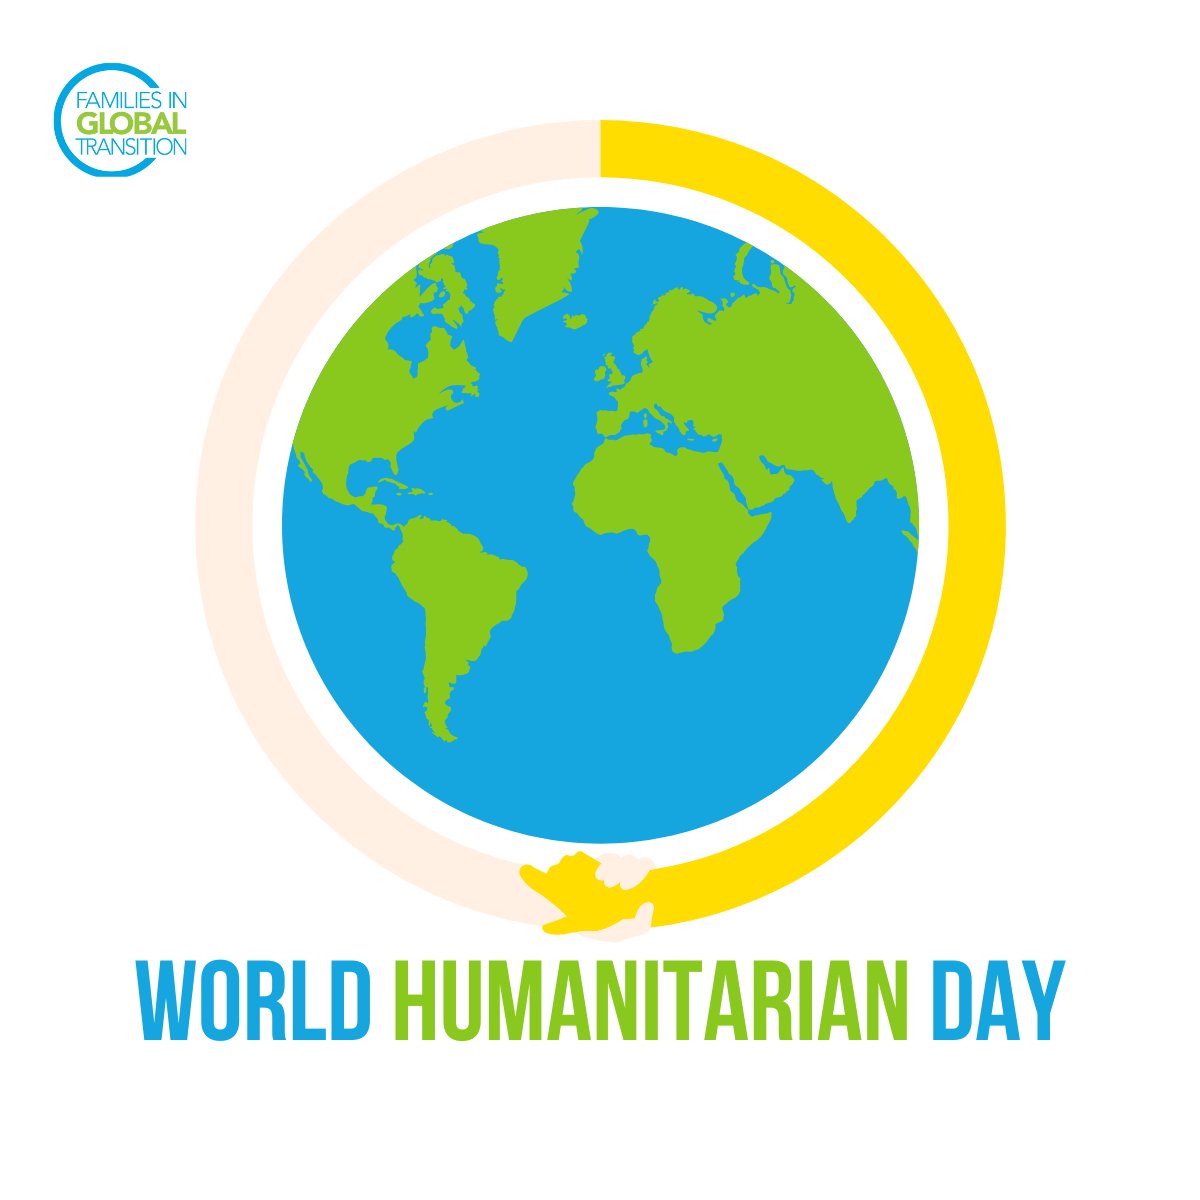 #nomatterwhat is the feature as today marks the 20th Anniversary of World Humanitarian Day. A day to consider and pay respect to those who often face danger in order to protect and help other humans in need.